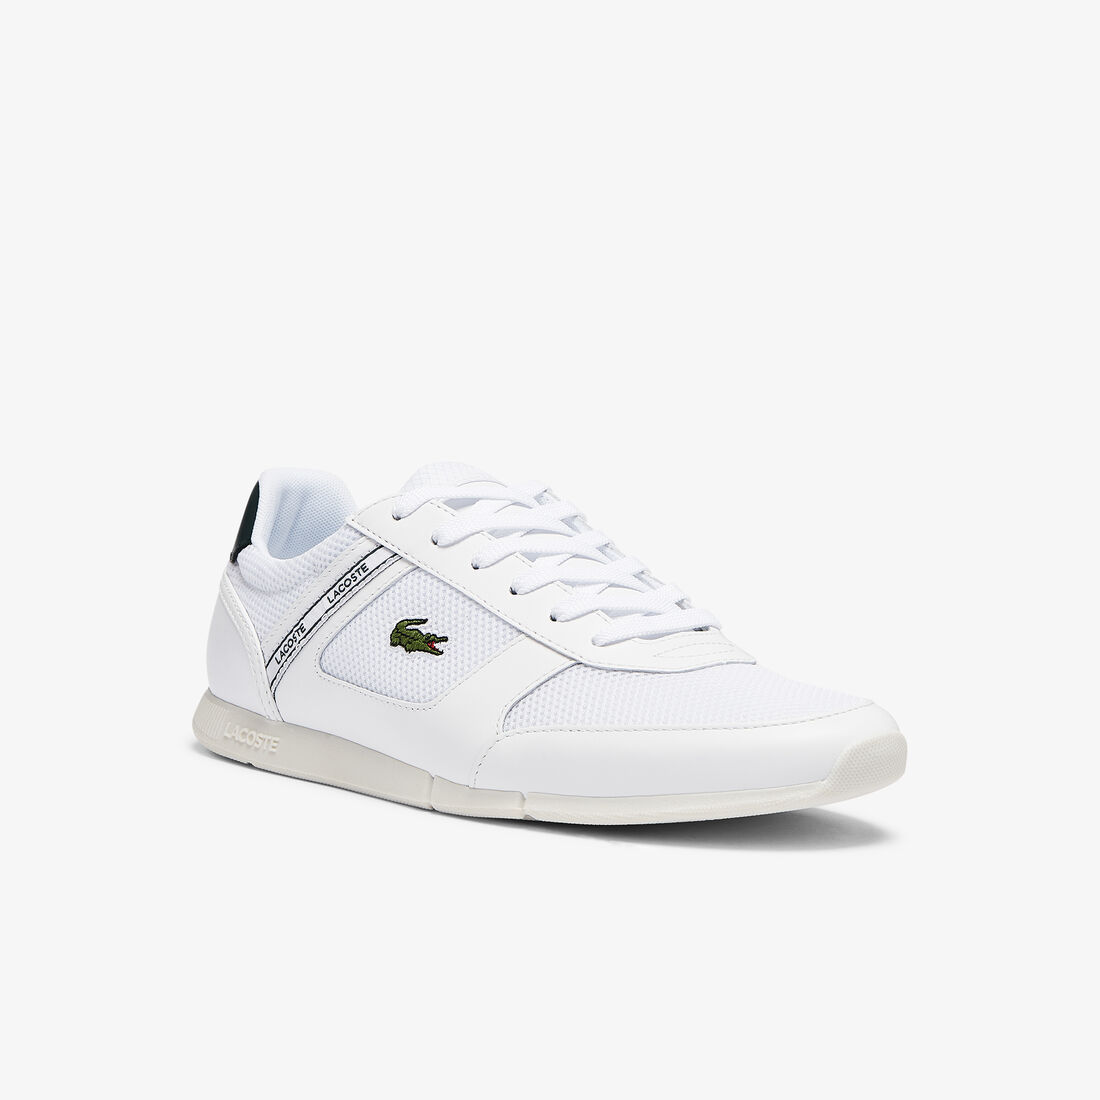 Men's Menerva Sport Textile and Leather Trainers